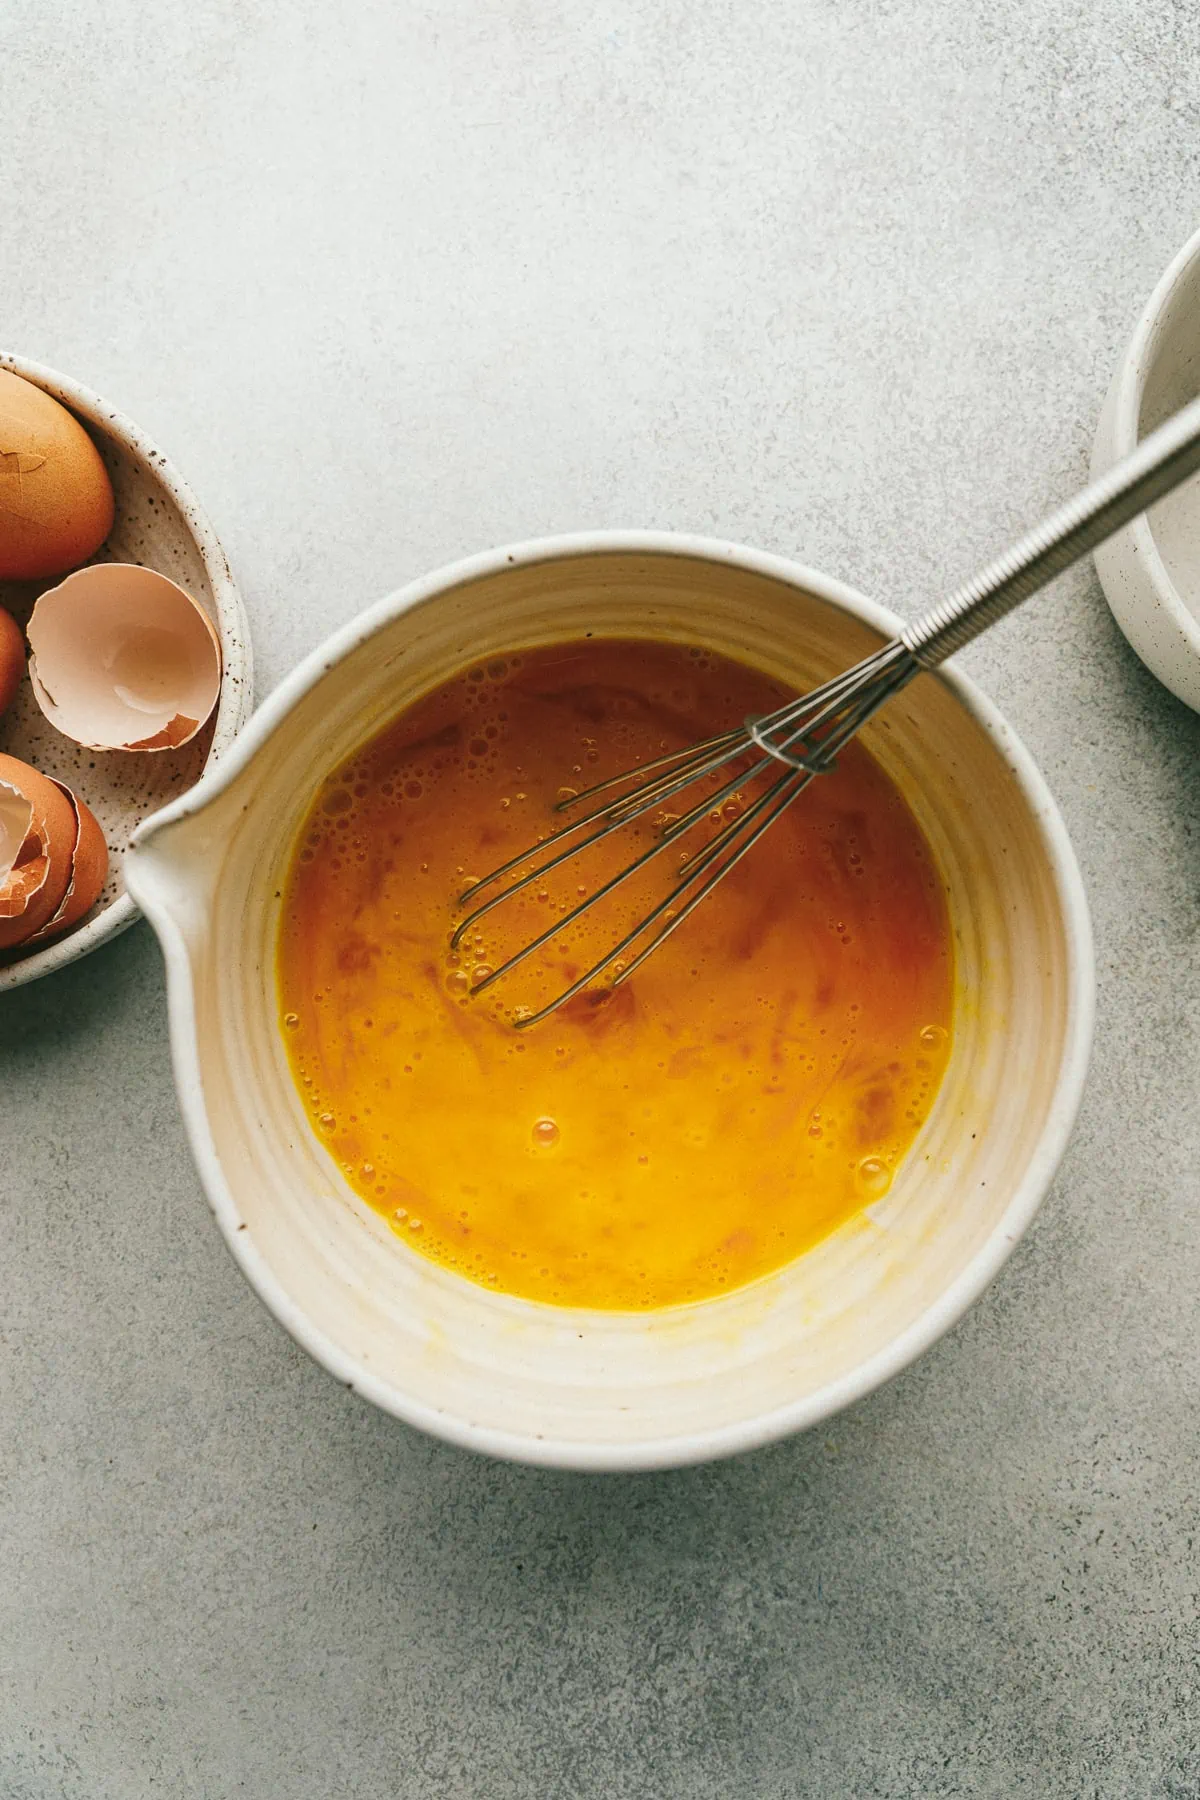 Cracked eggs in a small bowl with a whisk.